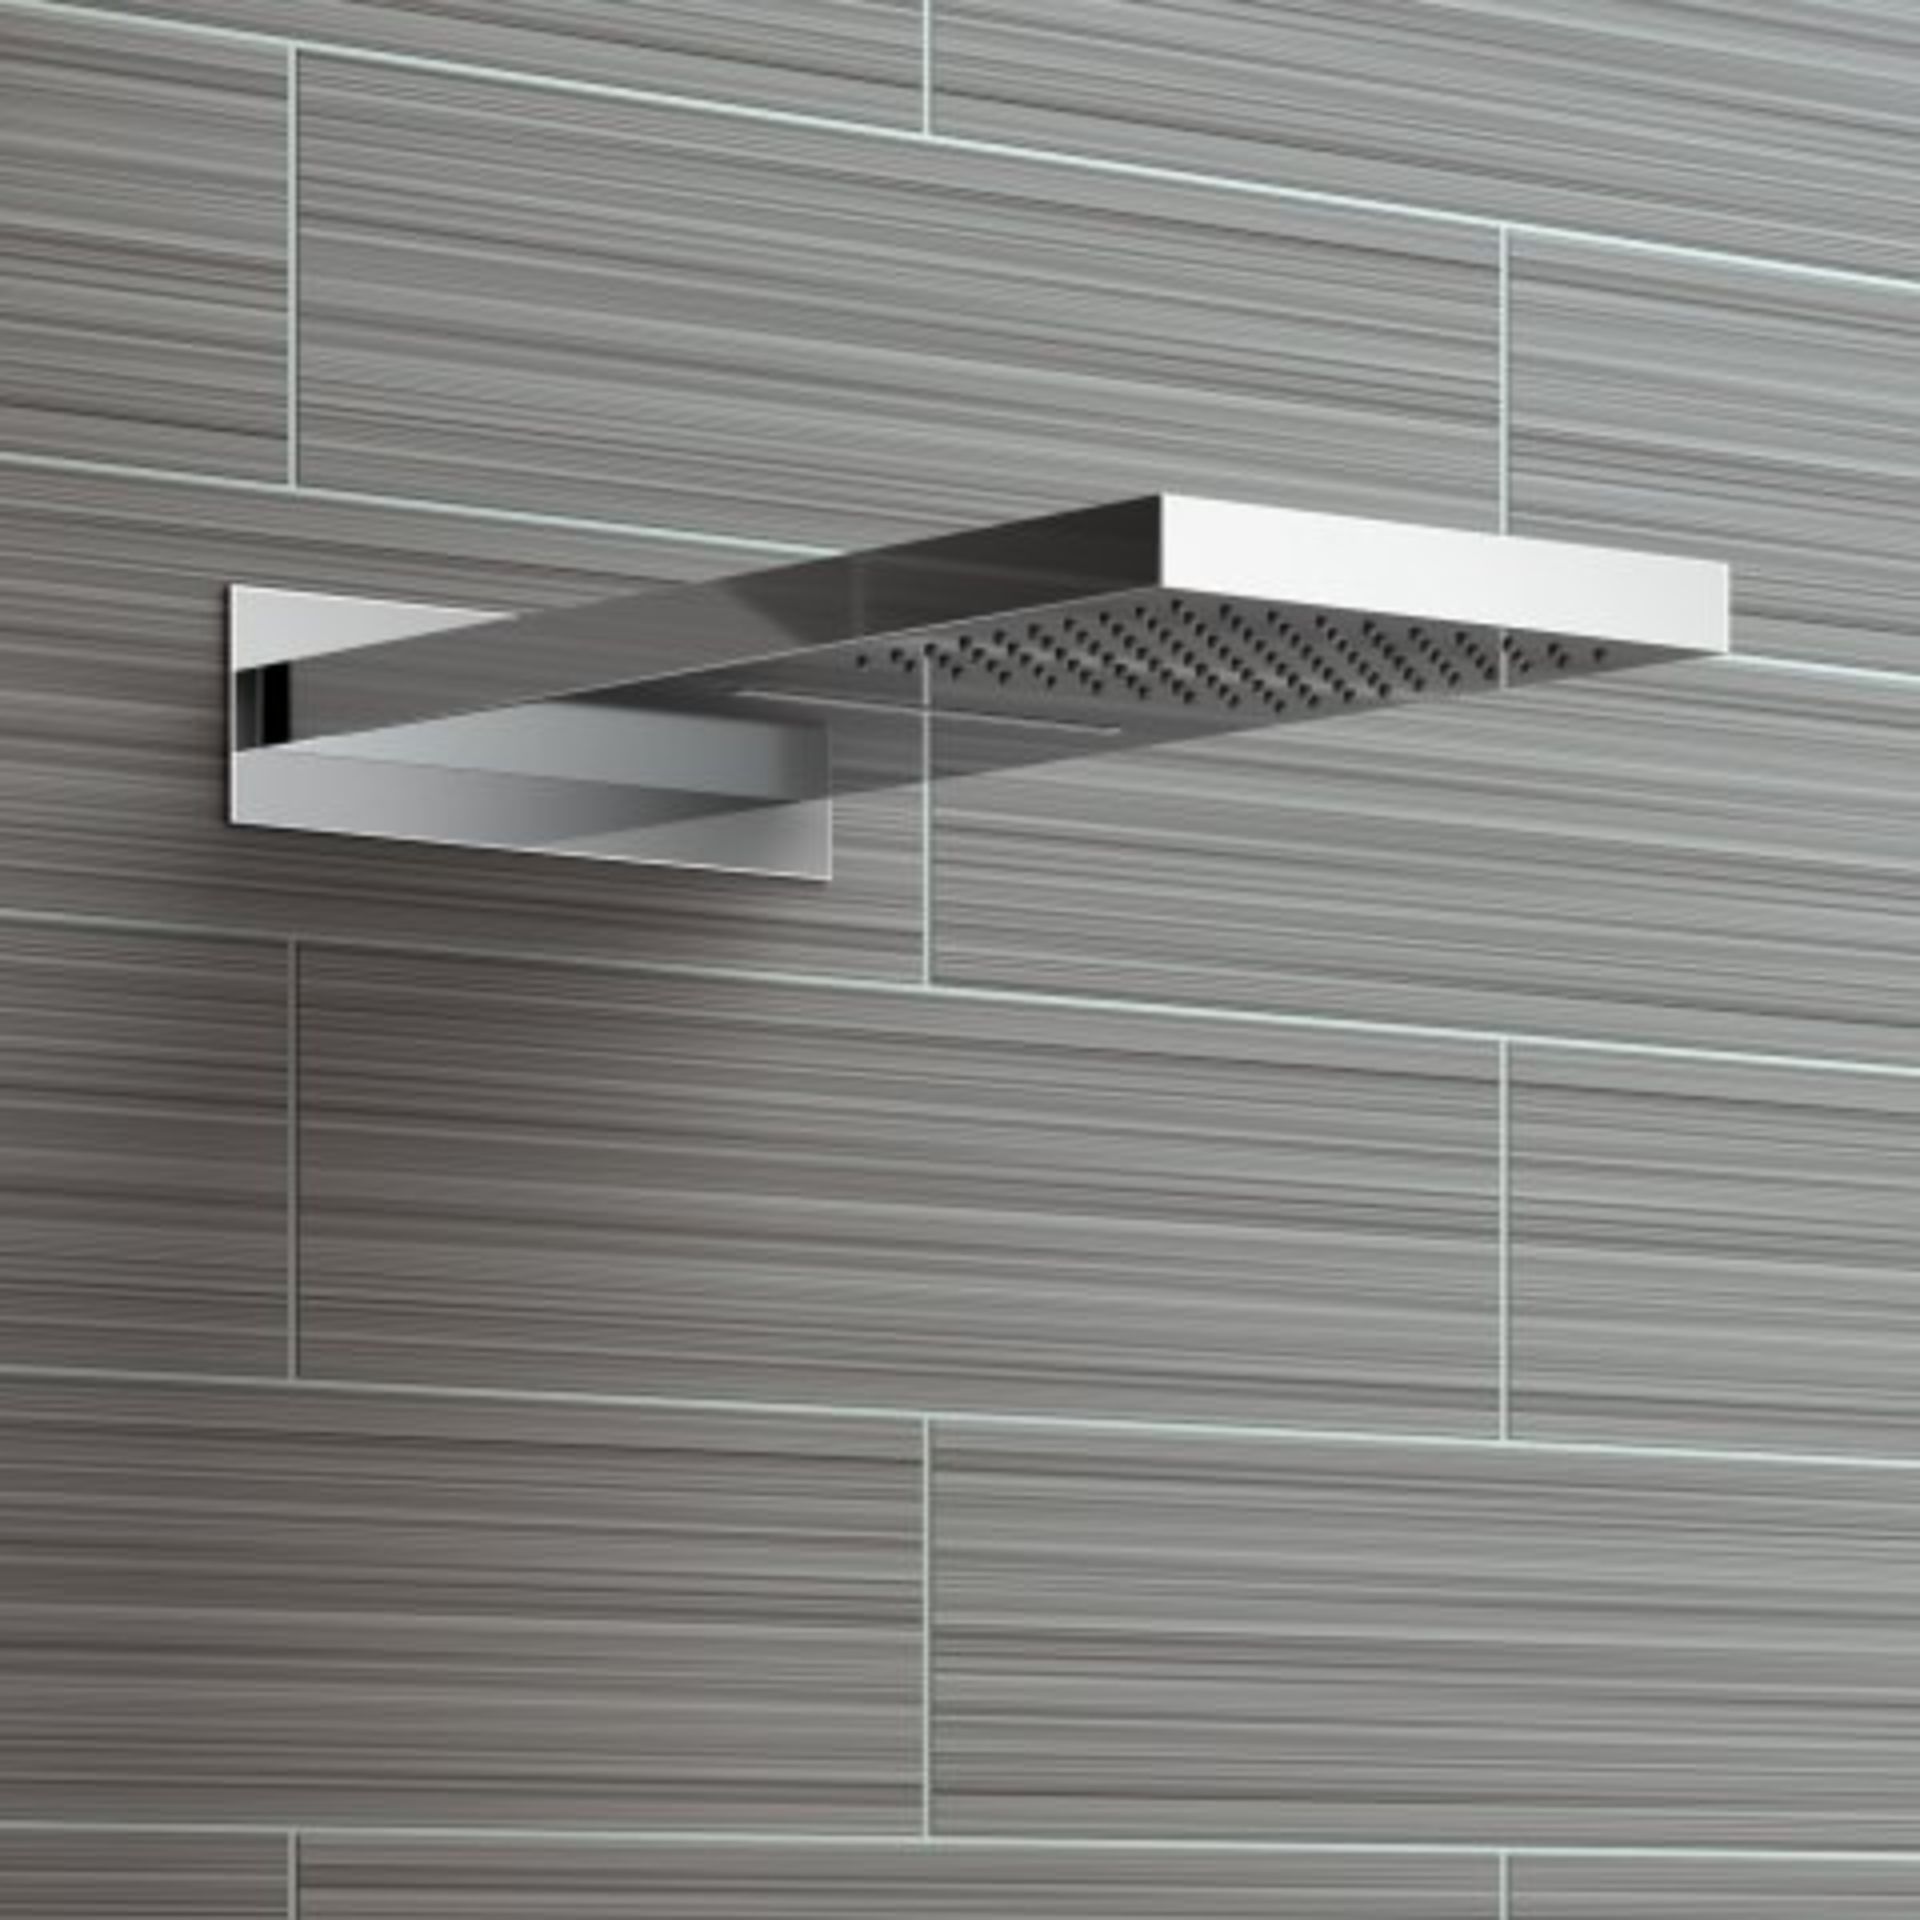 (I22) Stainless Steel 230x500mm Waterfall Shower Head. RRP £374.98. "What An Experience": Enjoy - Image 4 of 5